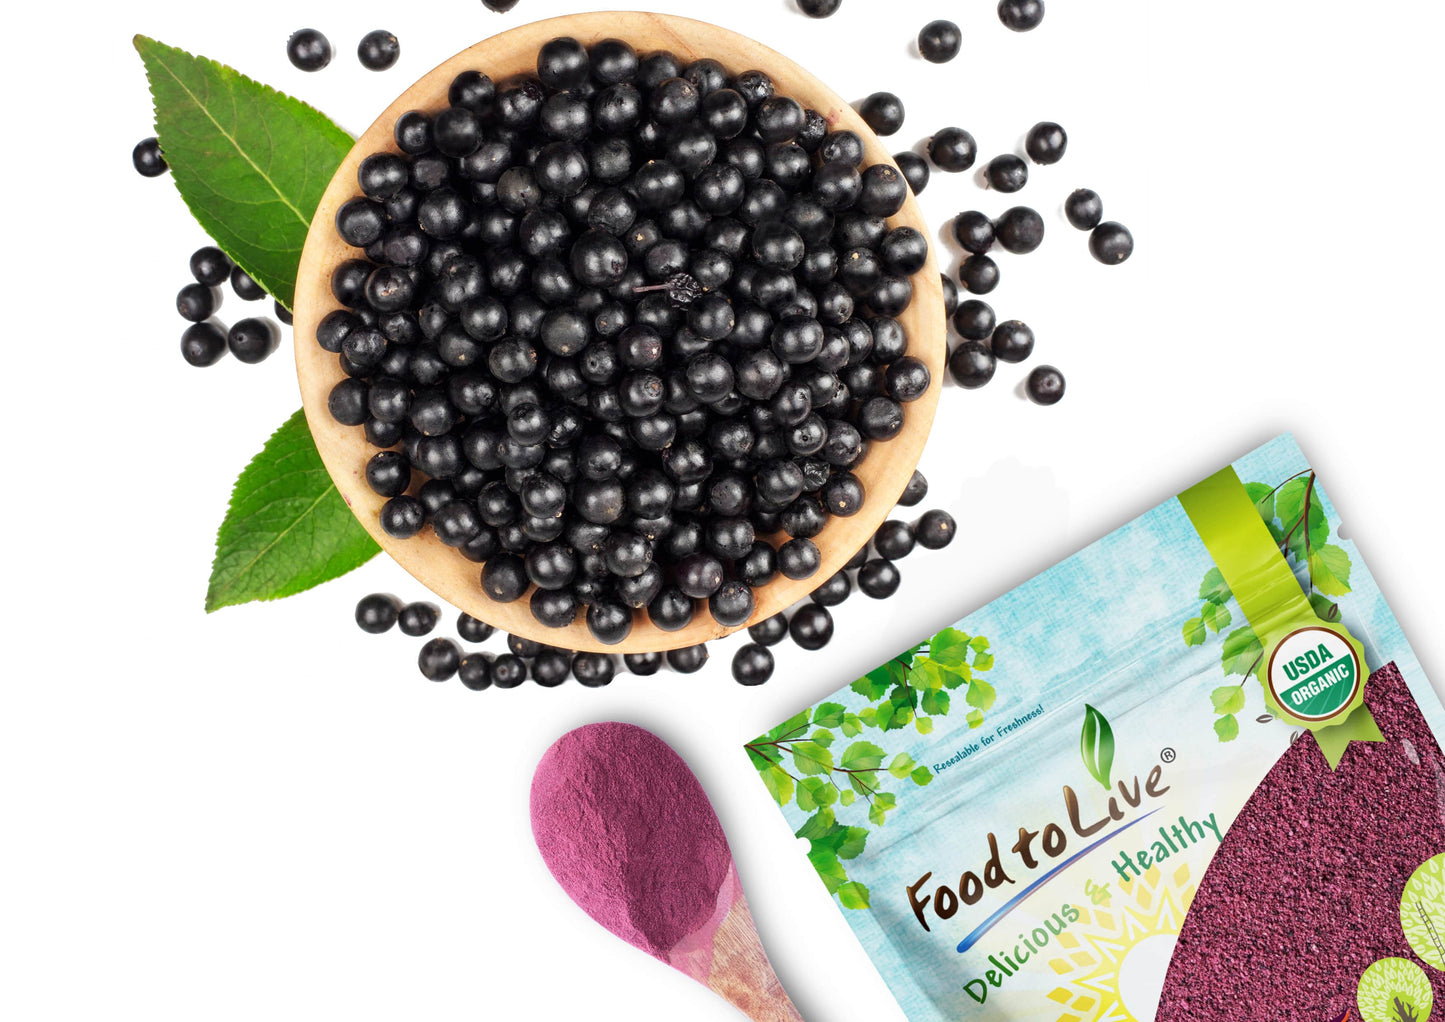 Organic Black Elderberry Powder - Non GMO, Made from Raw Dried Berries, Unsulfured, Vegan, Bulk, Great for Baking, Juices, Smoothies, Yogurts, and Instant Breakfast Drinks, No Sulphites